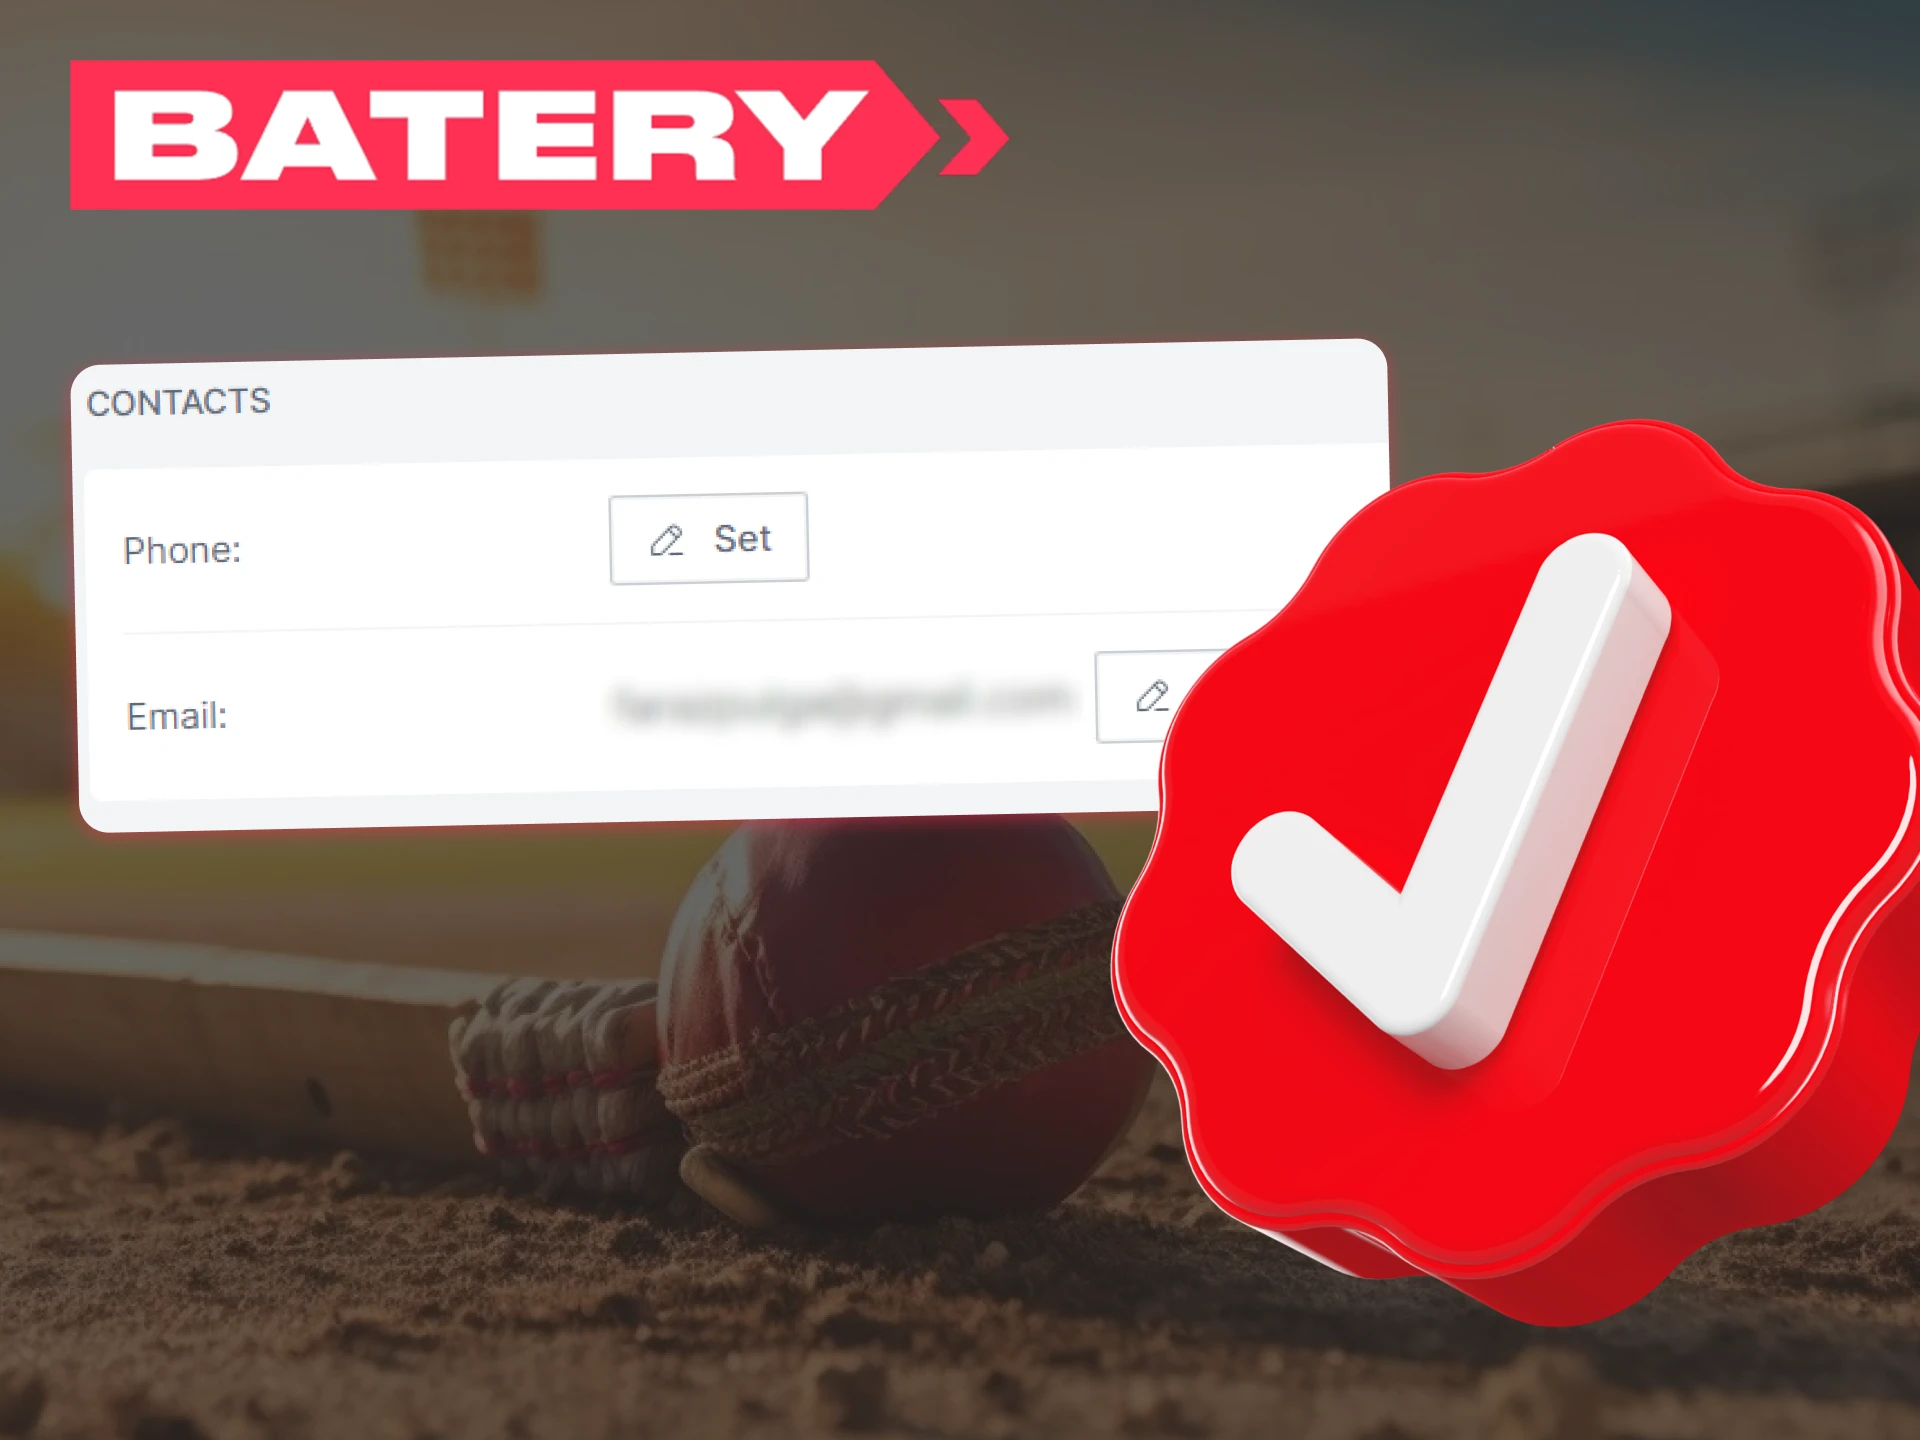 At Batery, you need to verify your identity by going through verification.